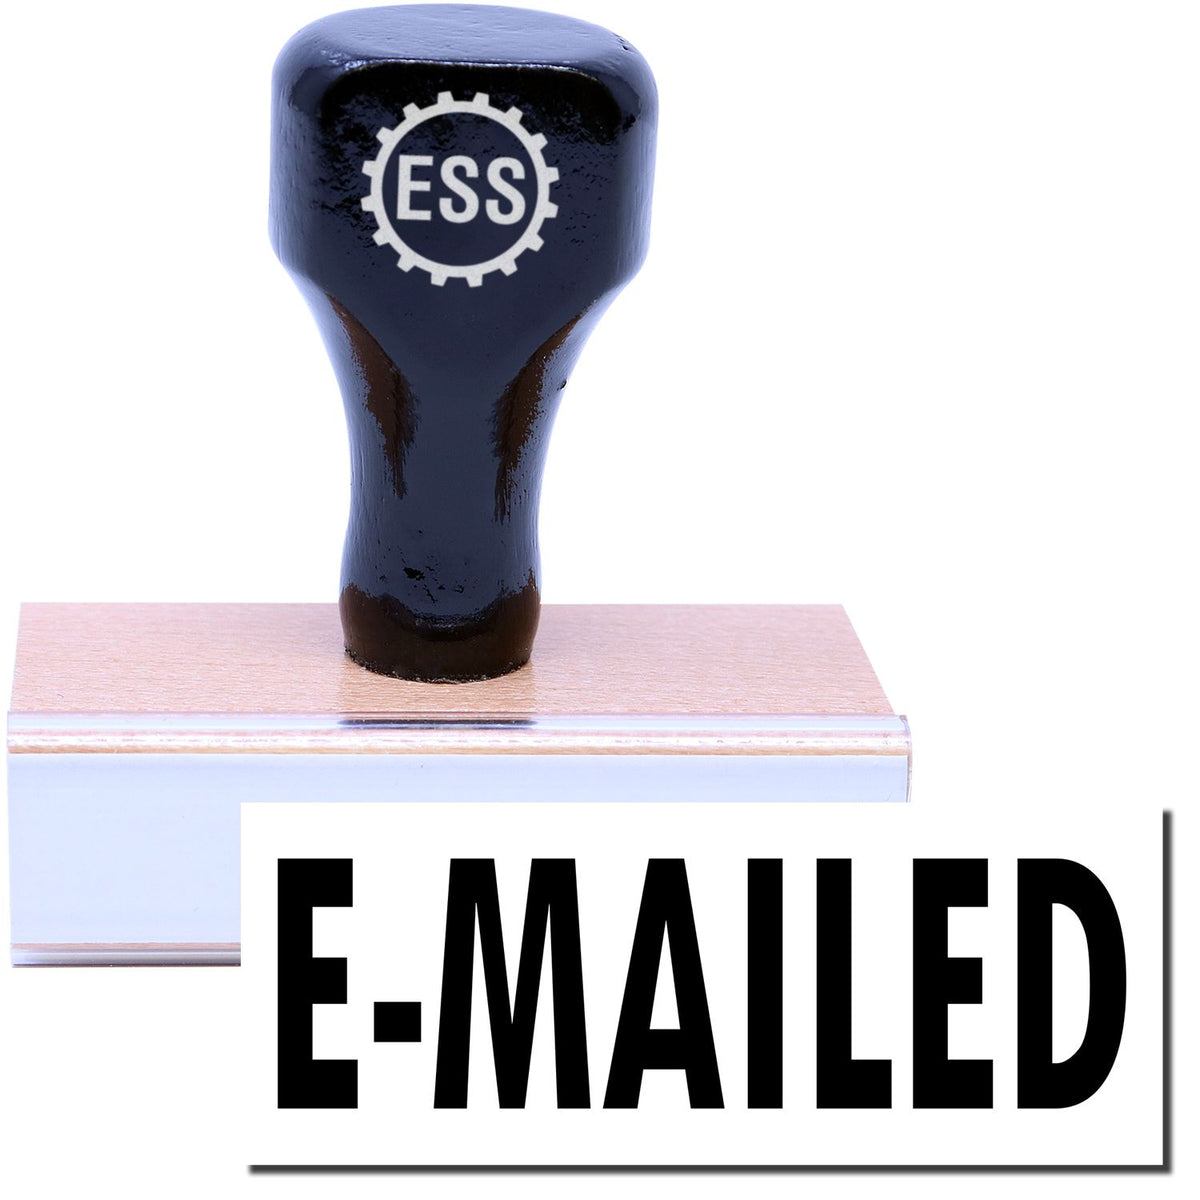 A stock office rubber stamp with a stamped image showing how the text &quot;E-MAILED&quot; is displayed after stamping.